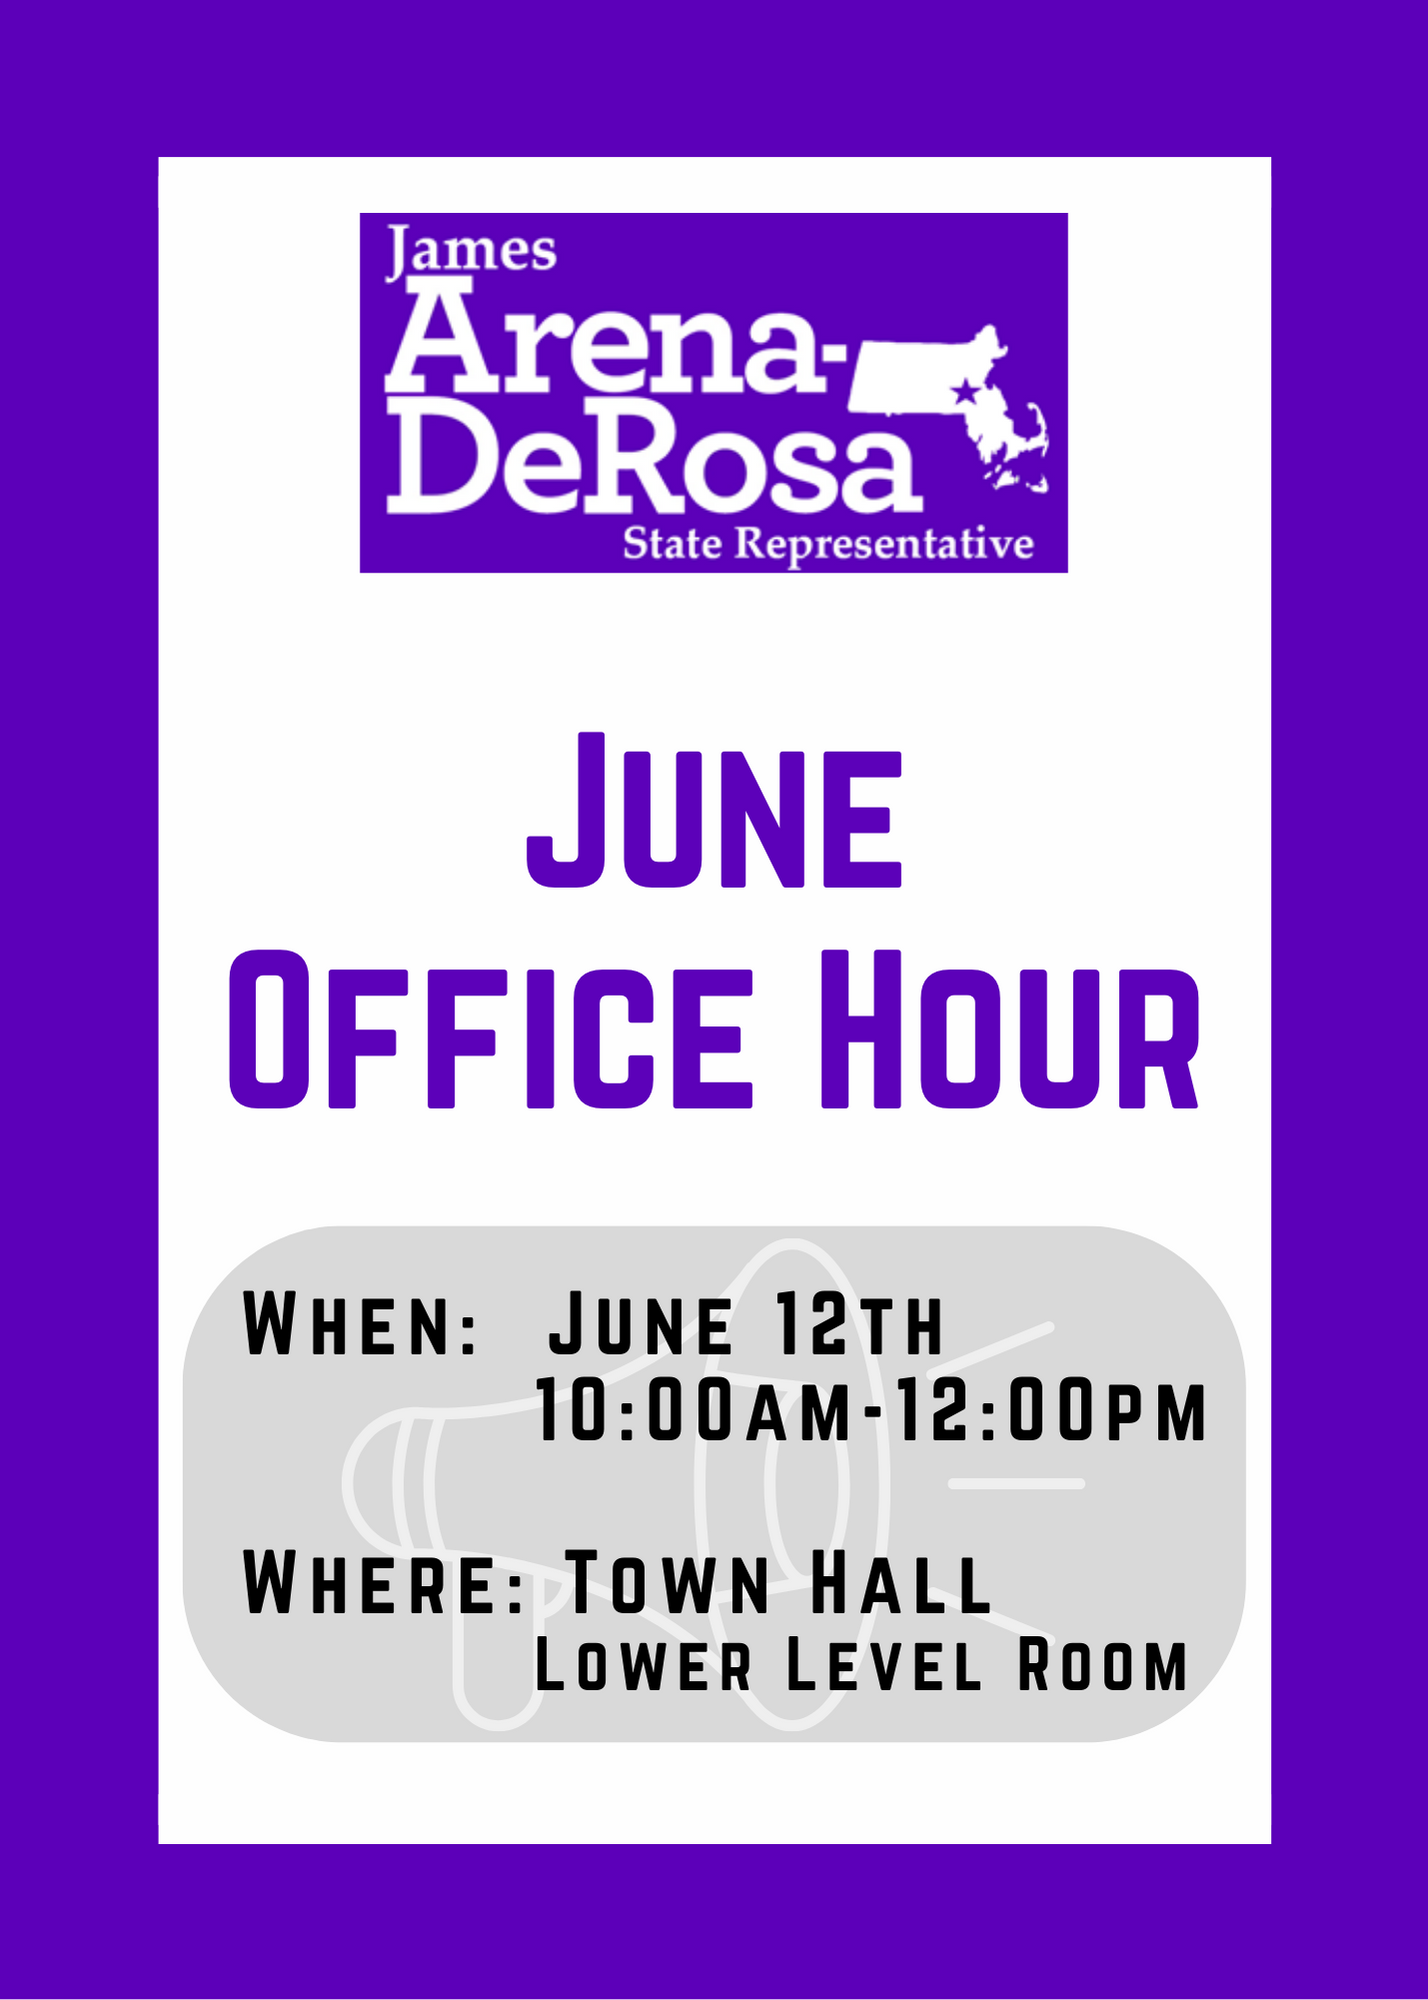 State Rep. Arena-DeRosa to host office hours at Town Hall June 12